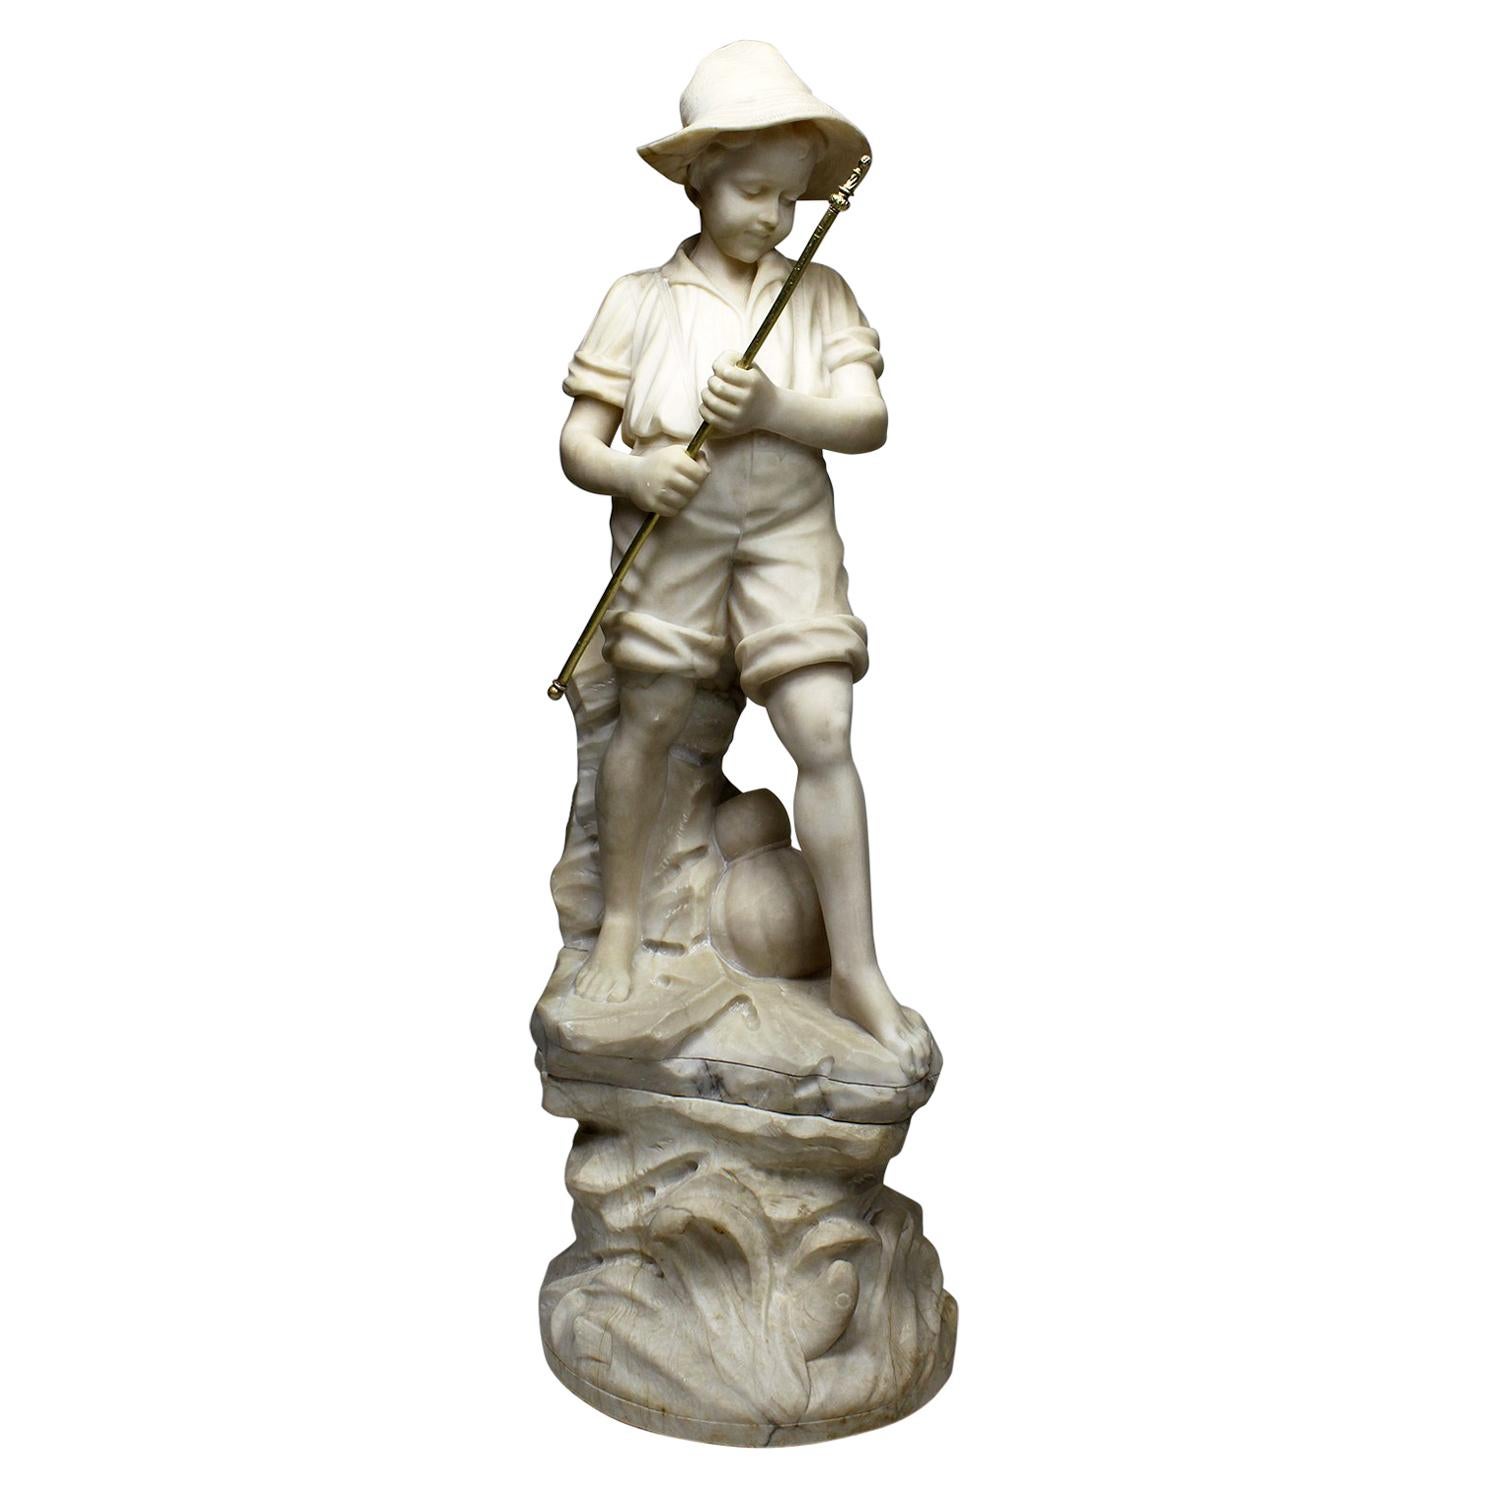 Charming Italian 19th-20th Century Carved Alabaster Figure of a Fisher Boy